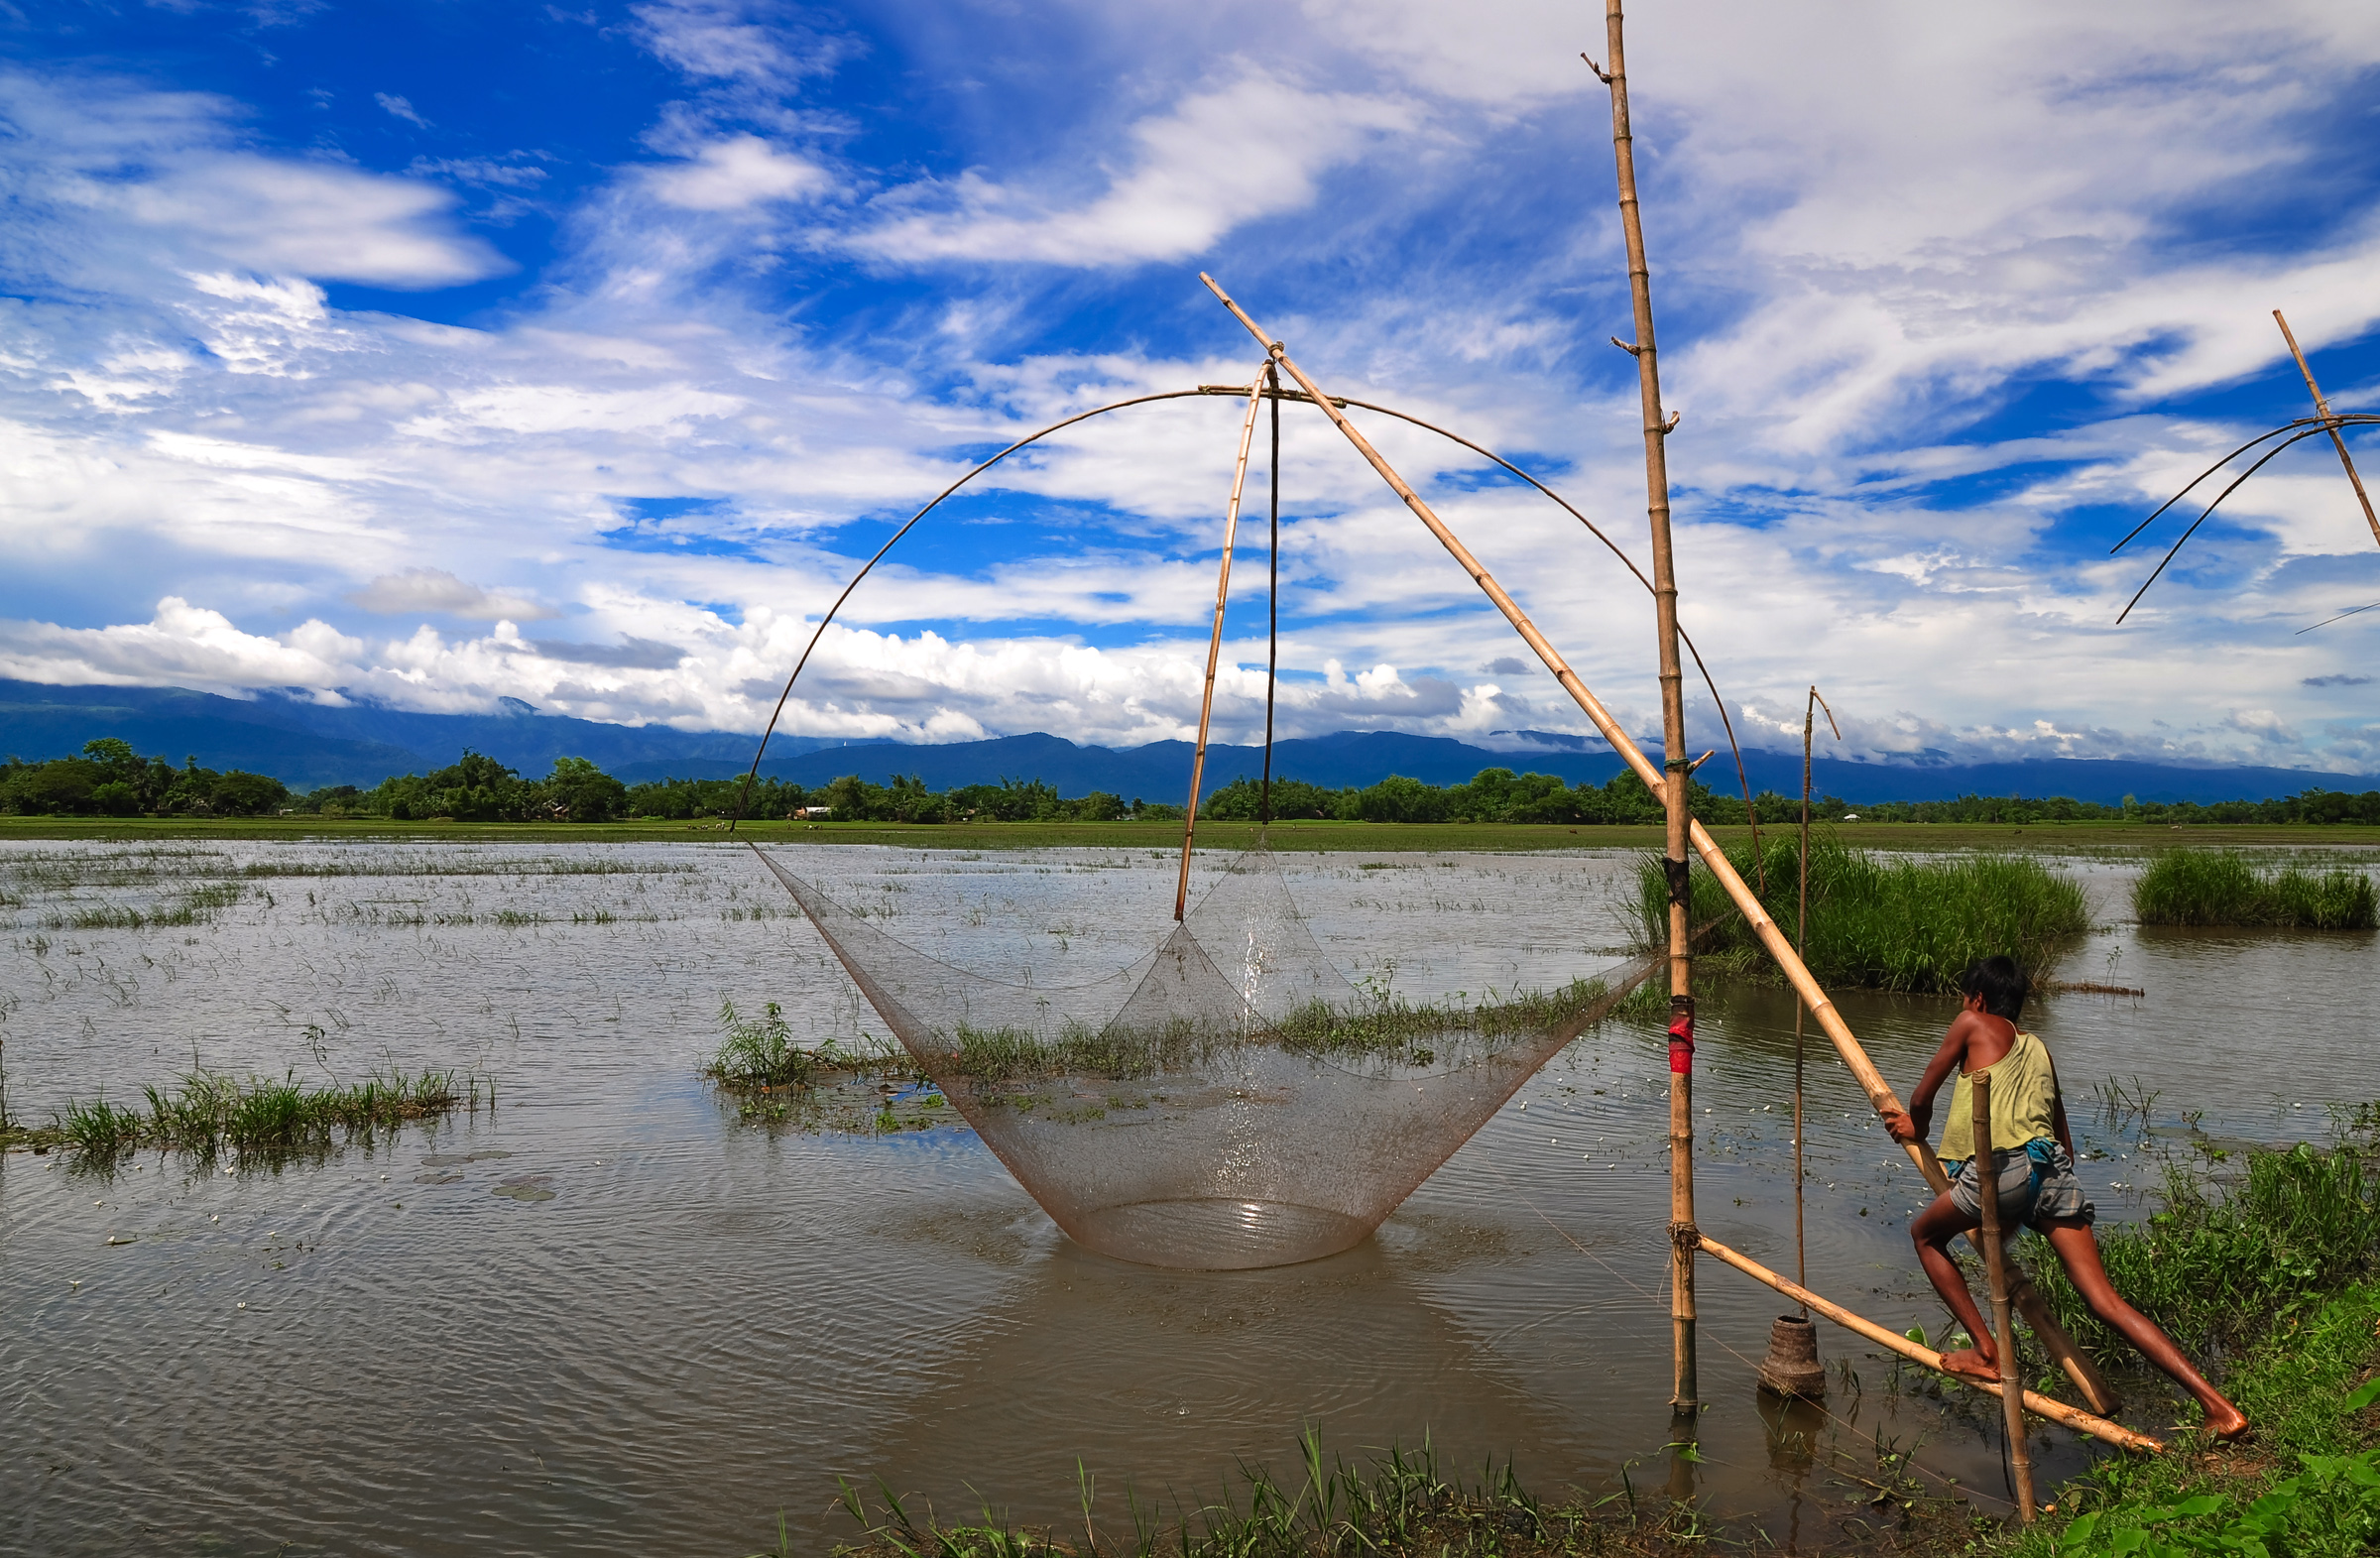 File:Fishing by lift net in the haor area of Bangladesh.jpg